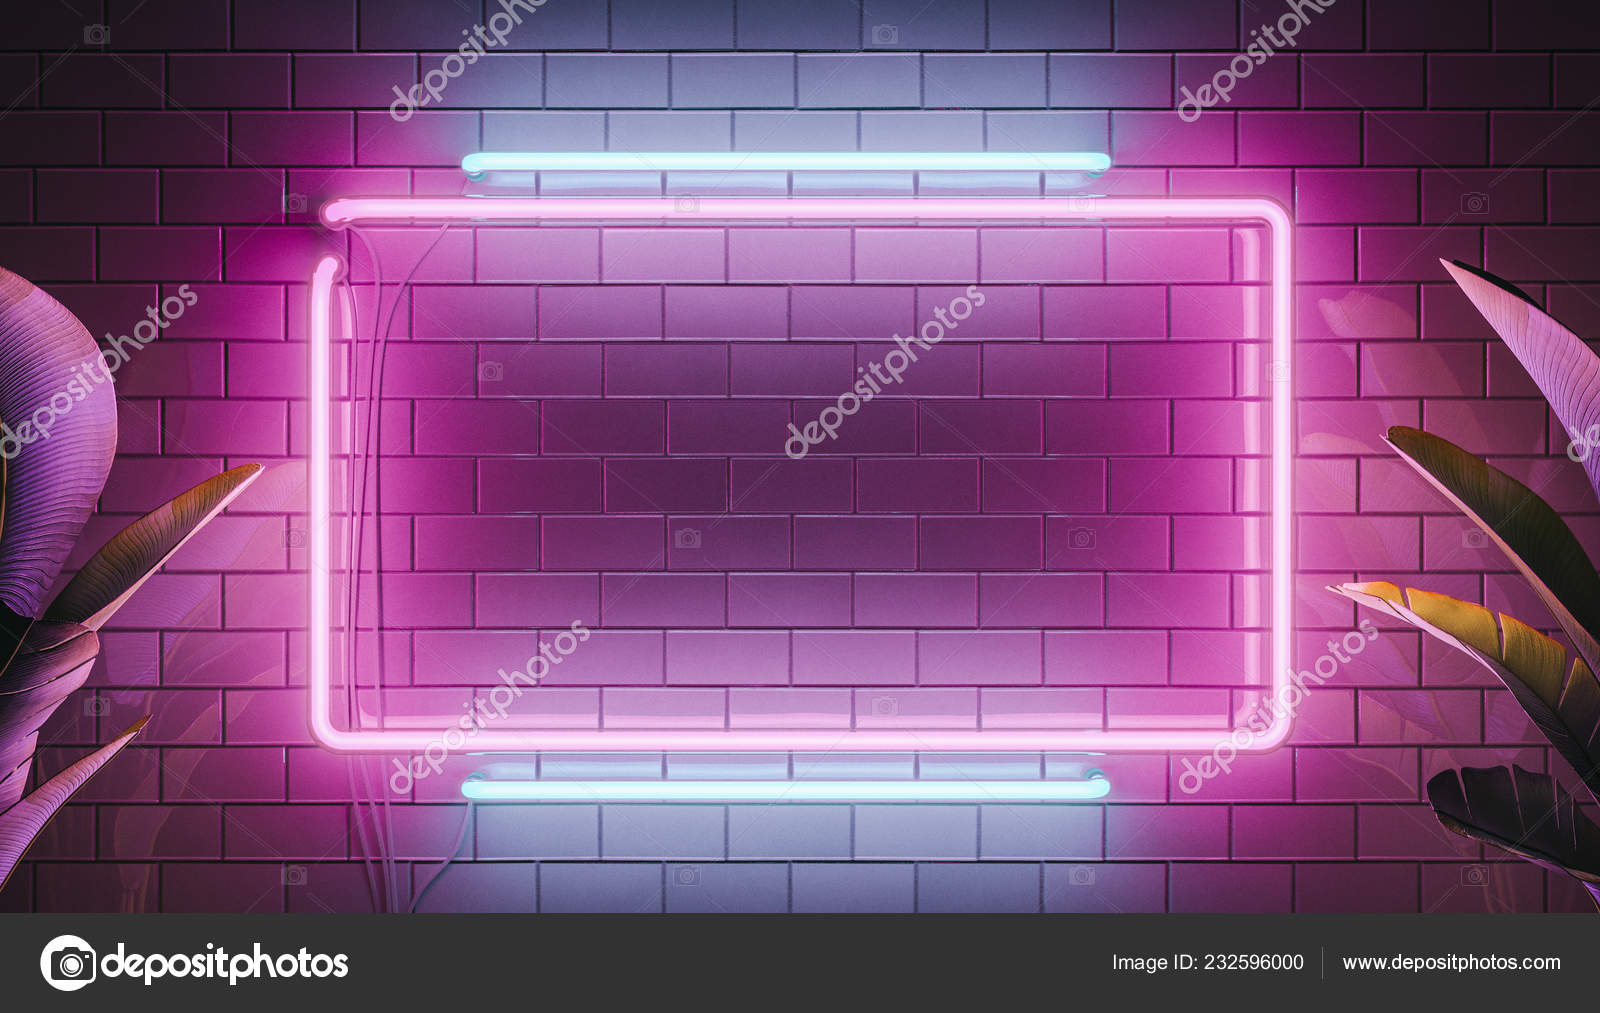 Neon light sign board background. 3d modern illustration. Neon elements and  plants. Stock Photo by ©bestpixels 232596000